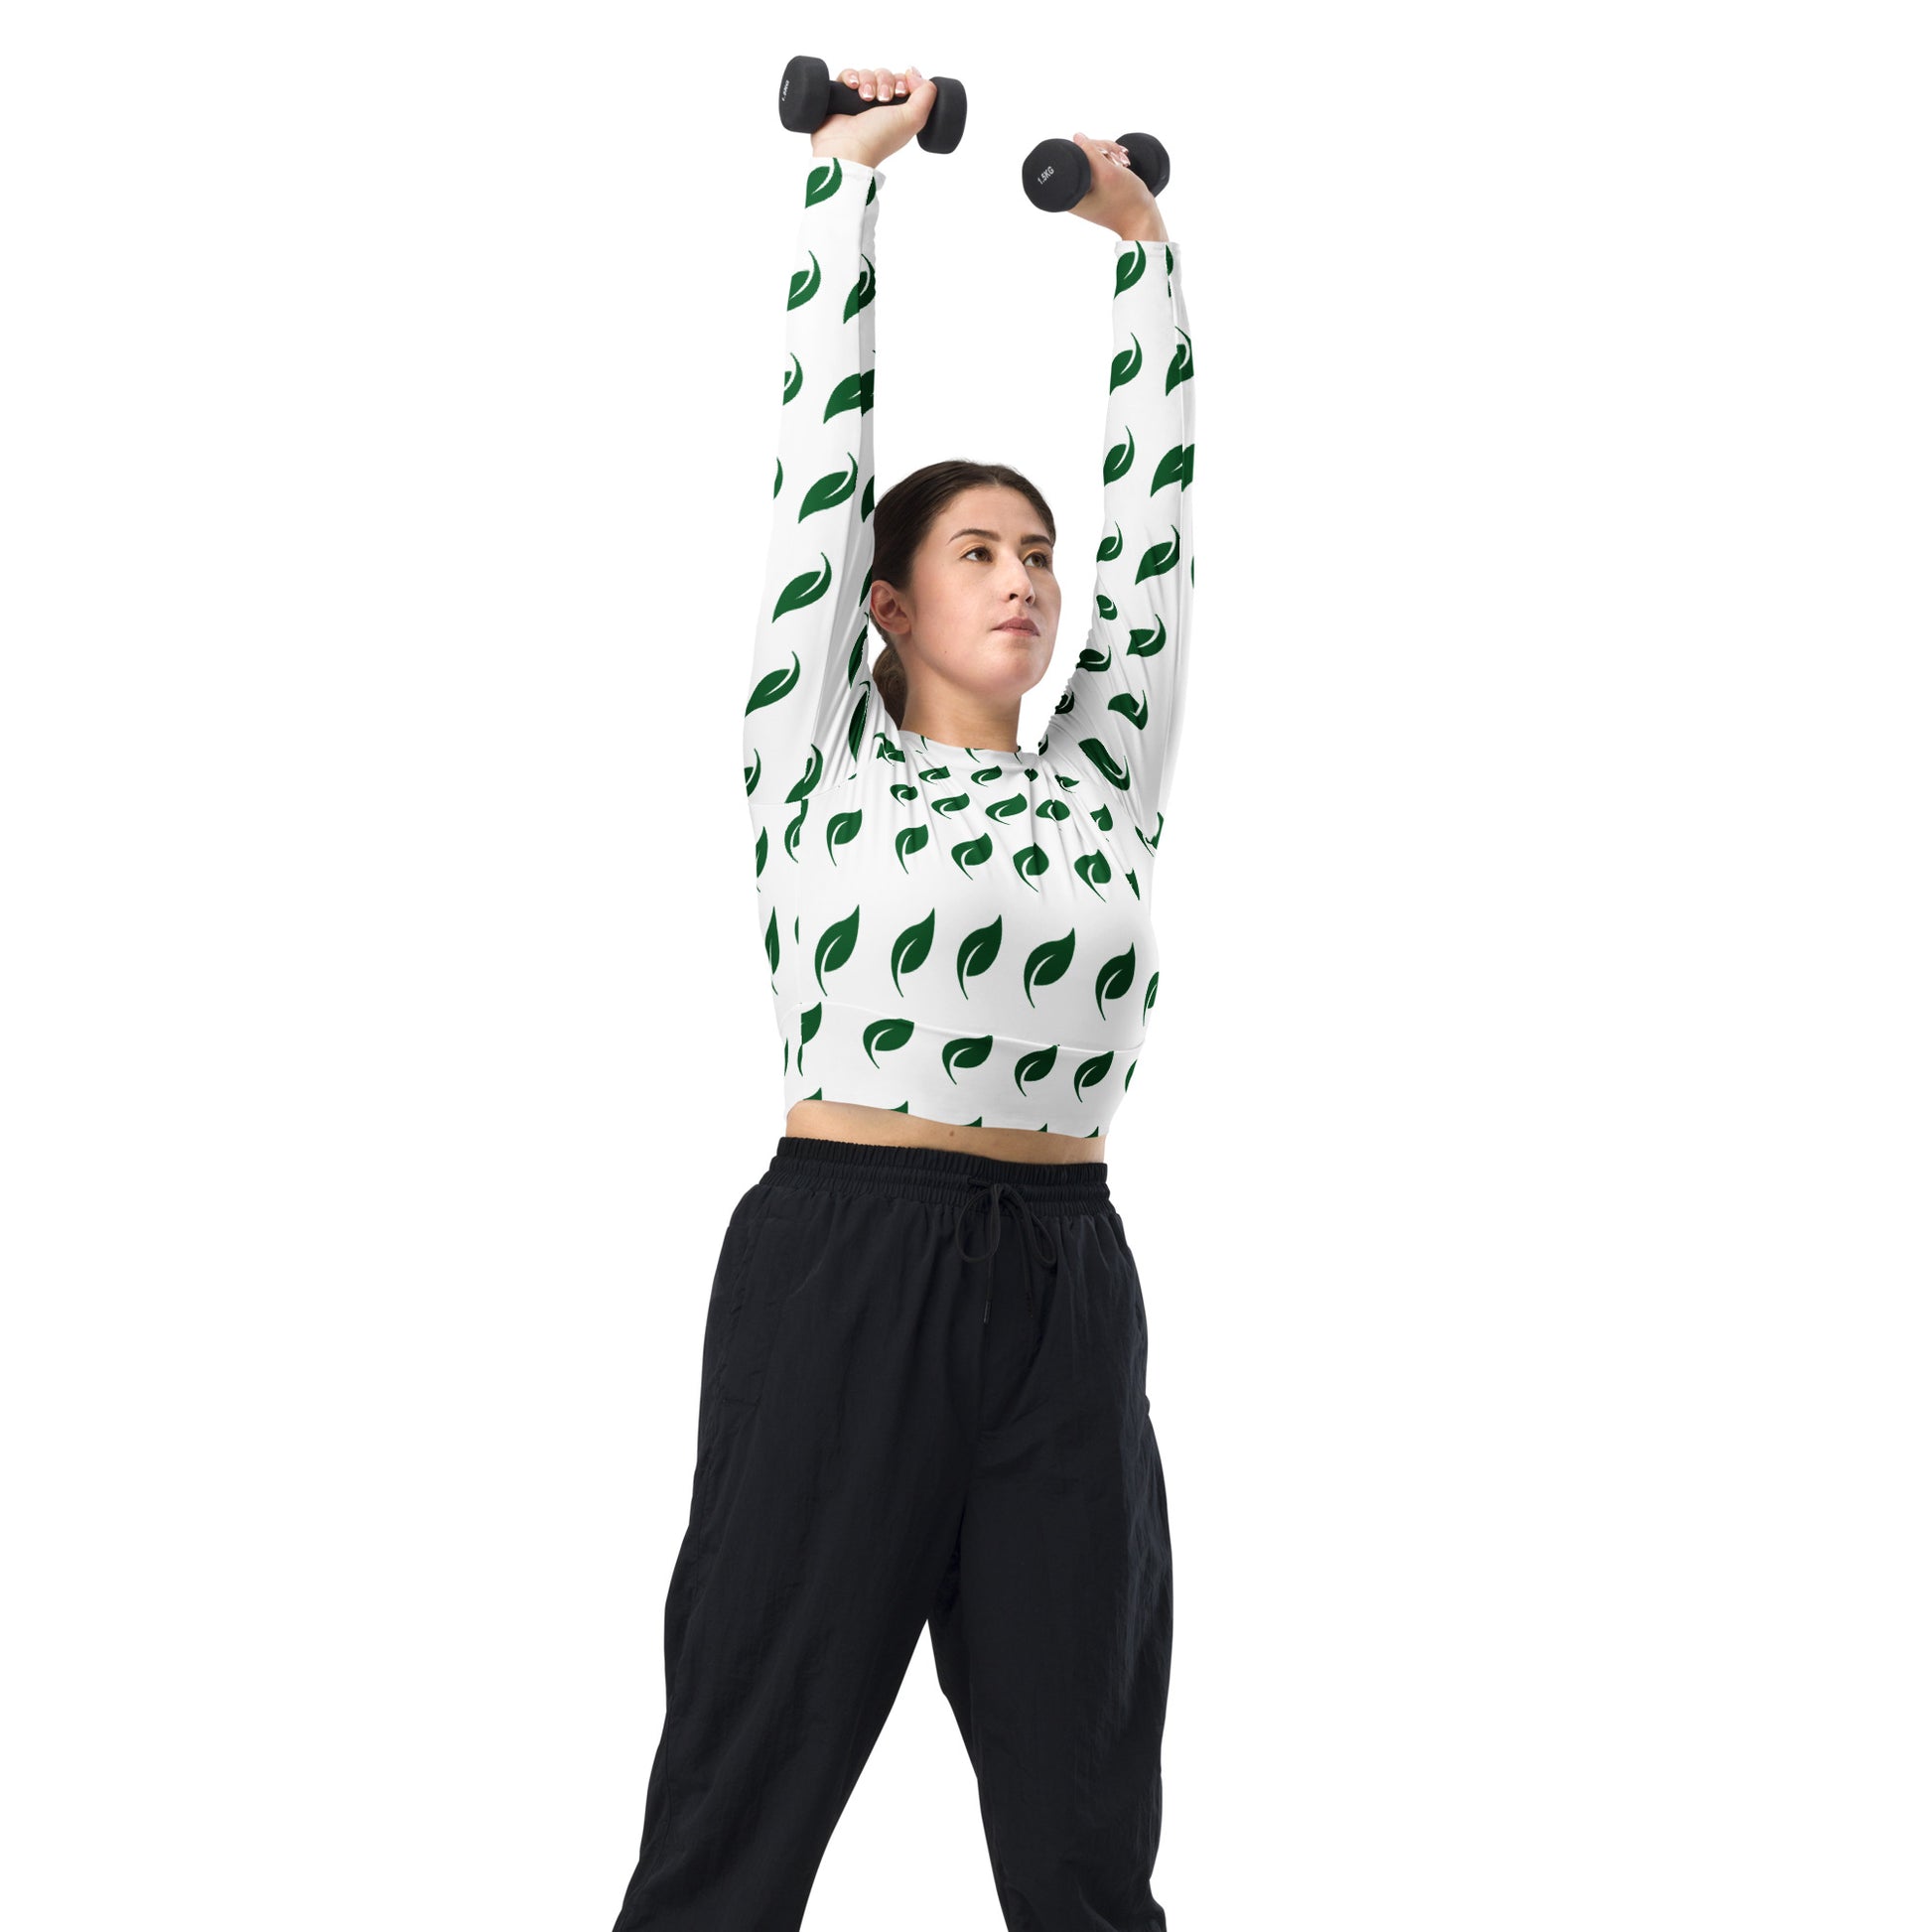 Model wearing the Eco Leaf Recycled Long-Sleeve Crop Top while lifting weights over her head.